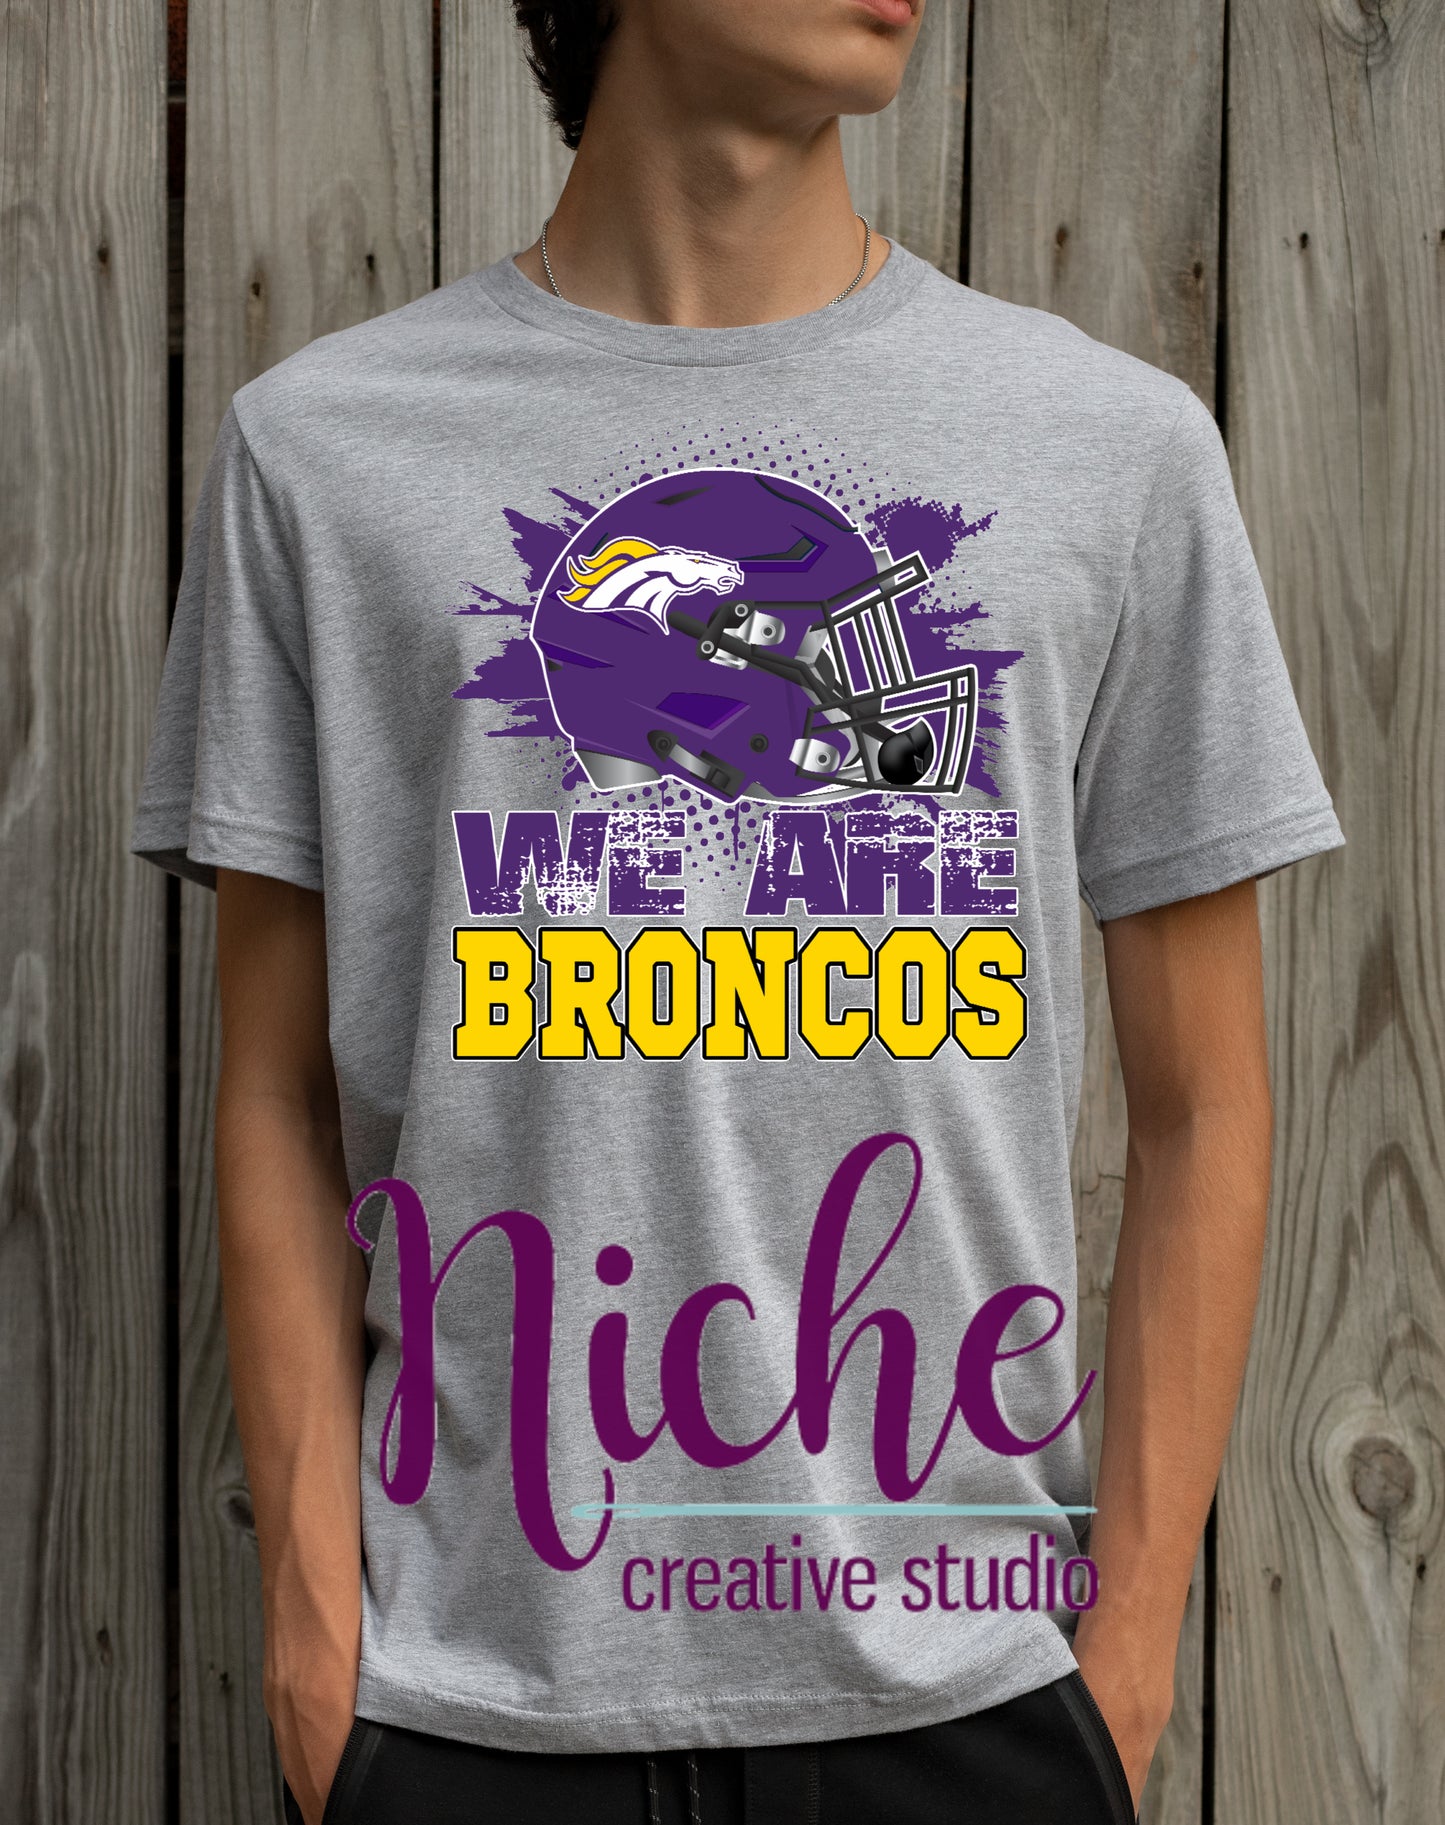 -BRO303 We are Broncos Football Decal